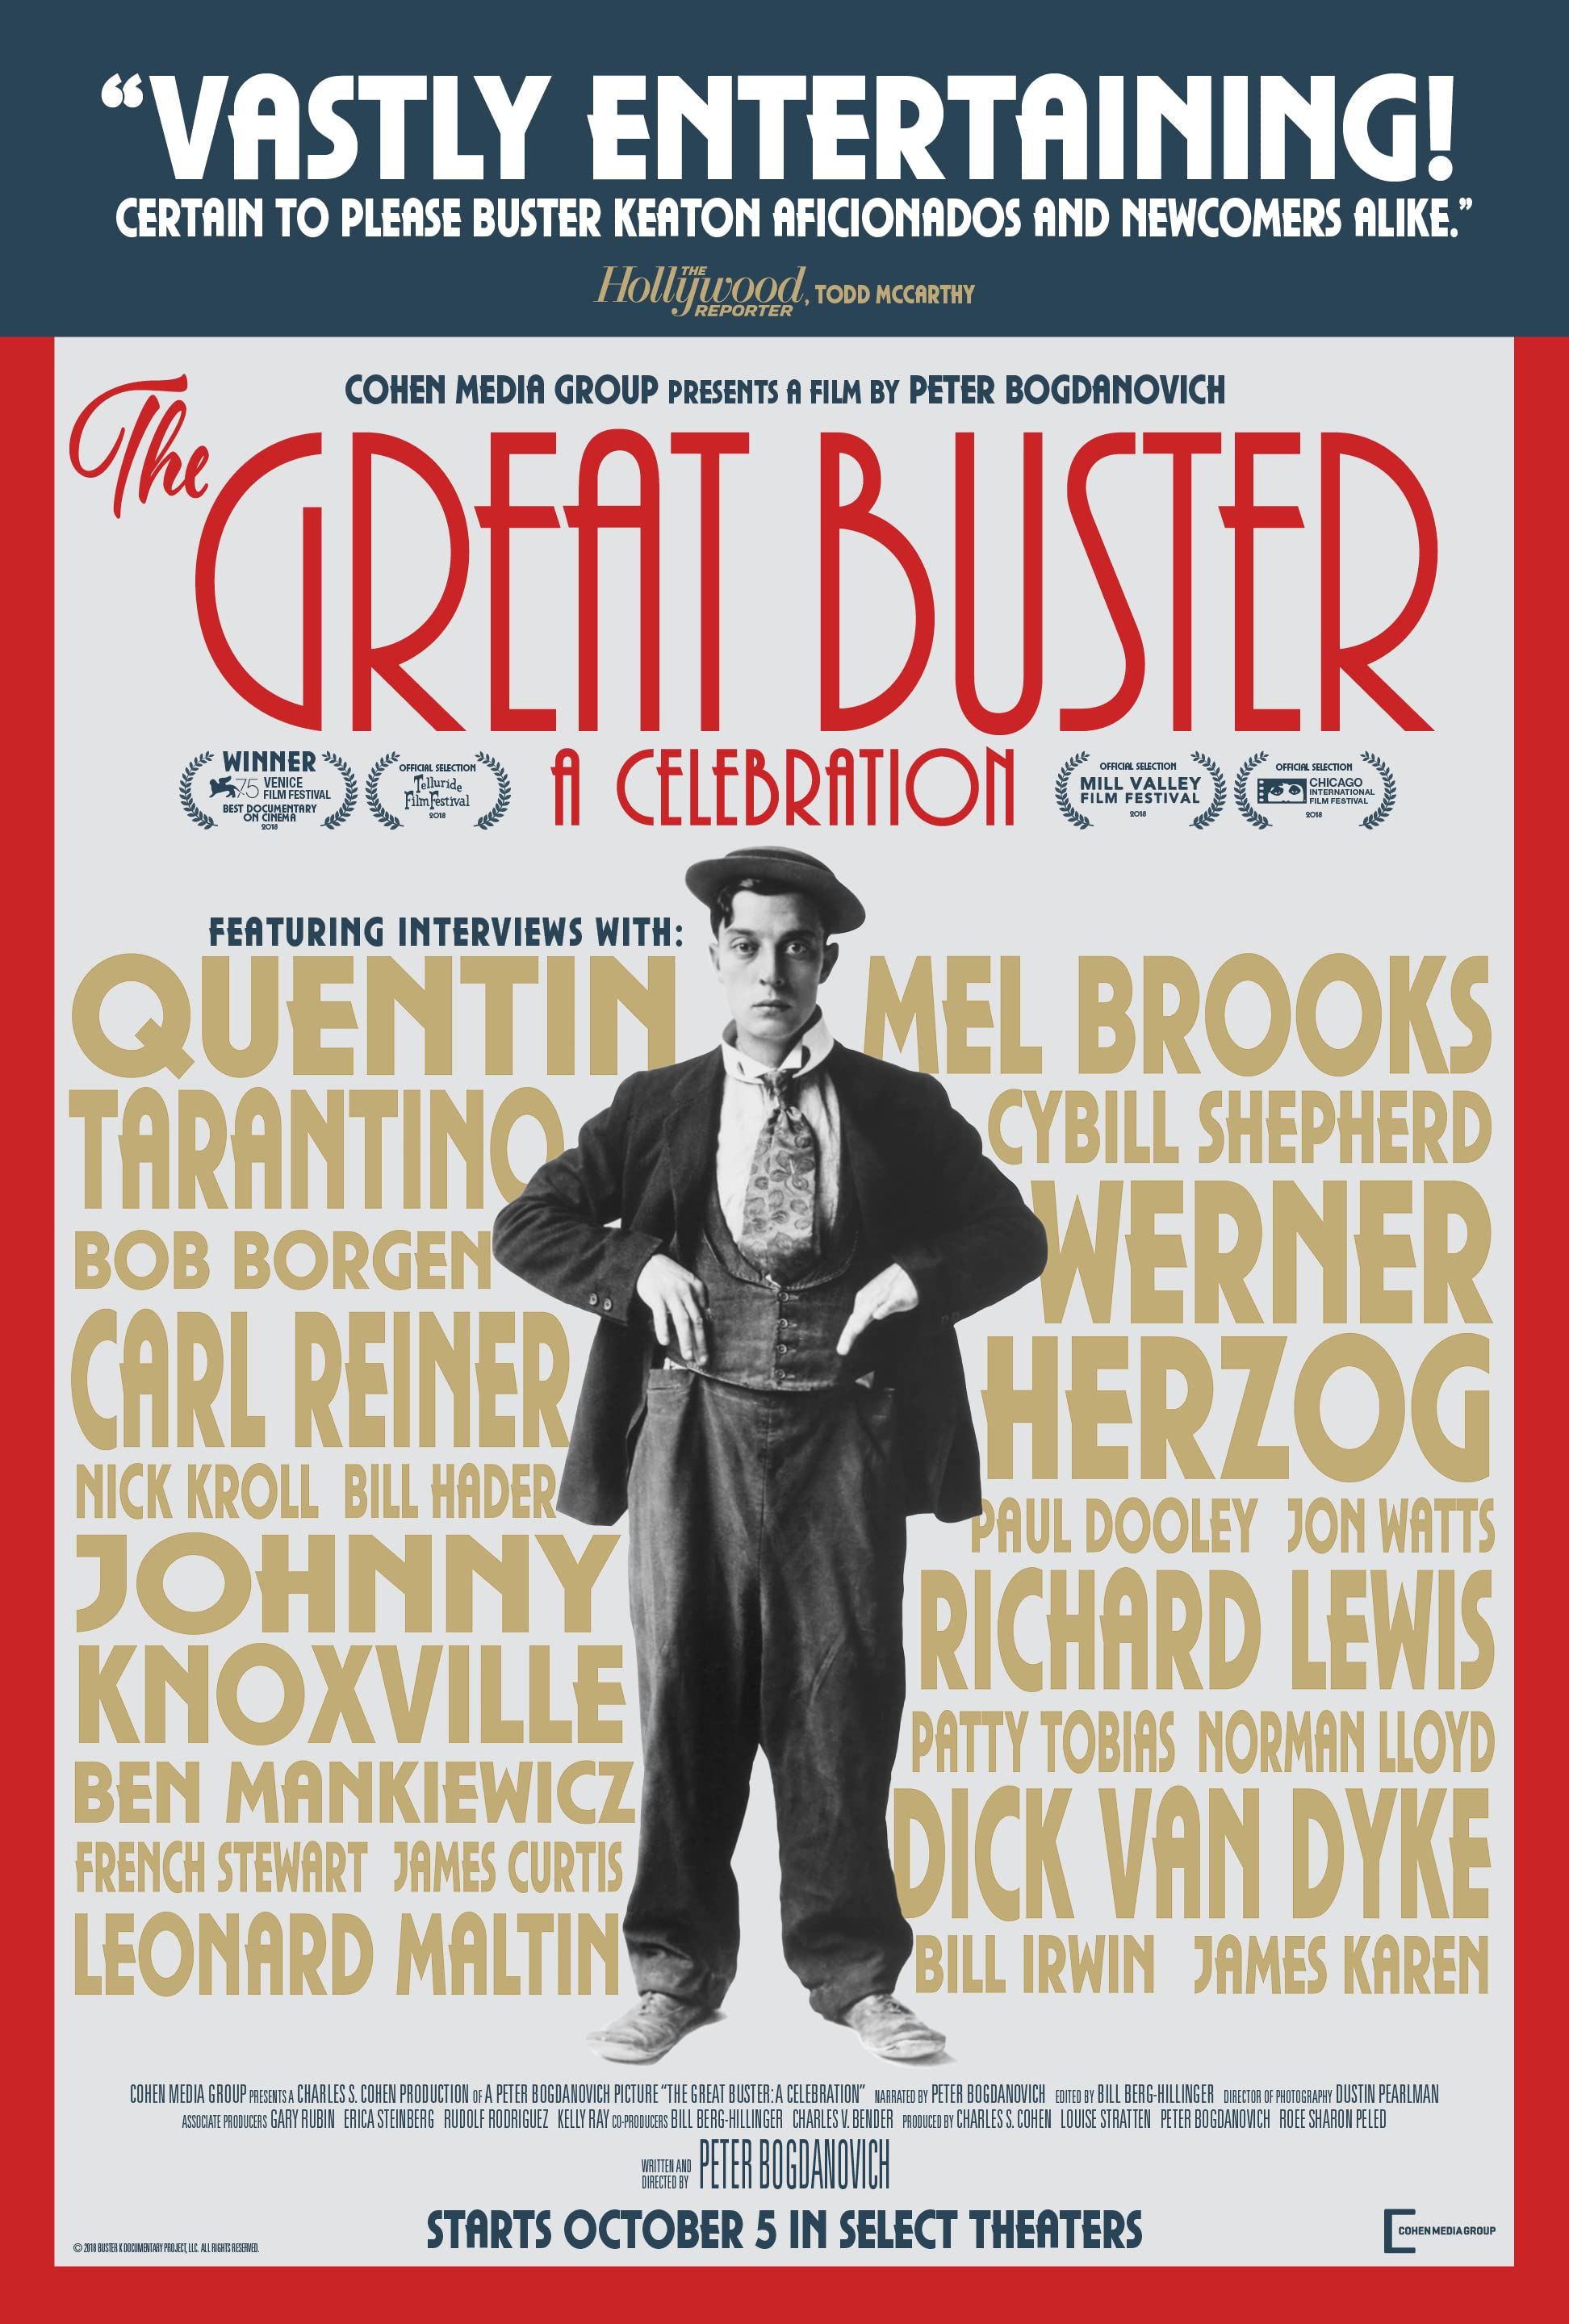 The Great Buster – A Celebration